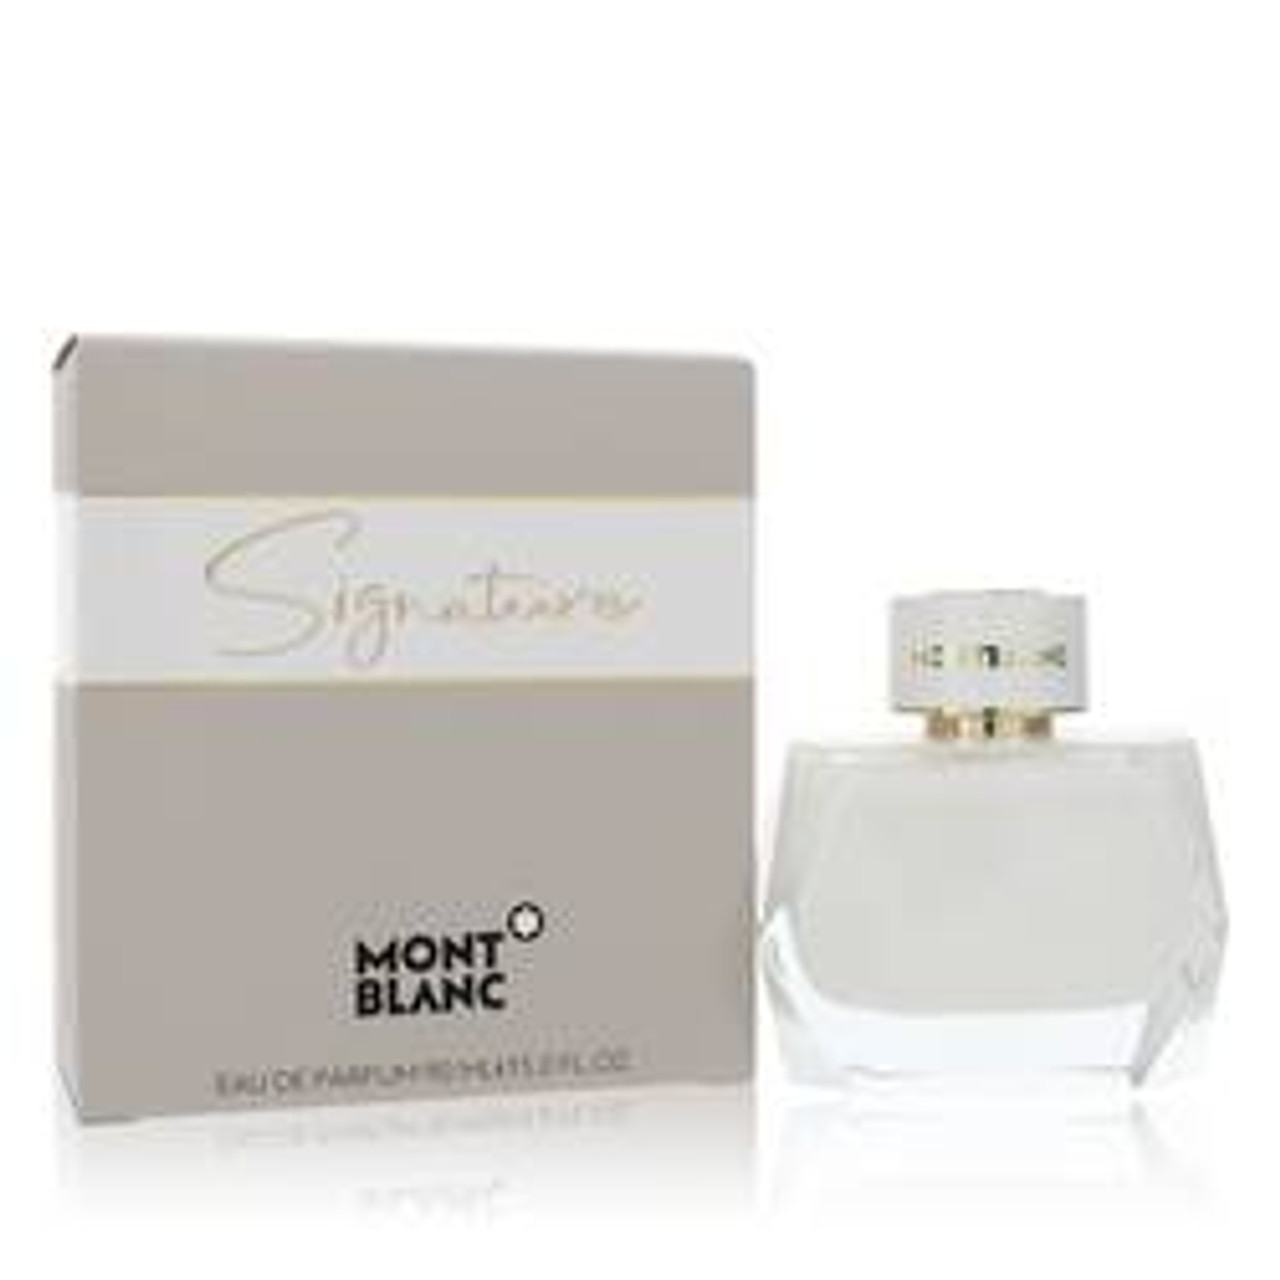 Montblanc Signature Perfume By Mont Blanc Eau De Parfum Spray 3 oz for Women - [From 136.00 - Choose pk Qty ] - *Ships from Miami